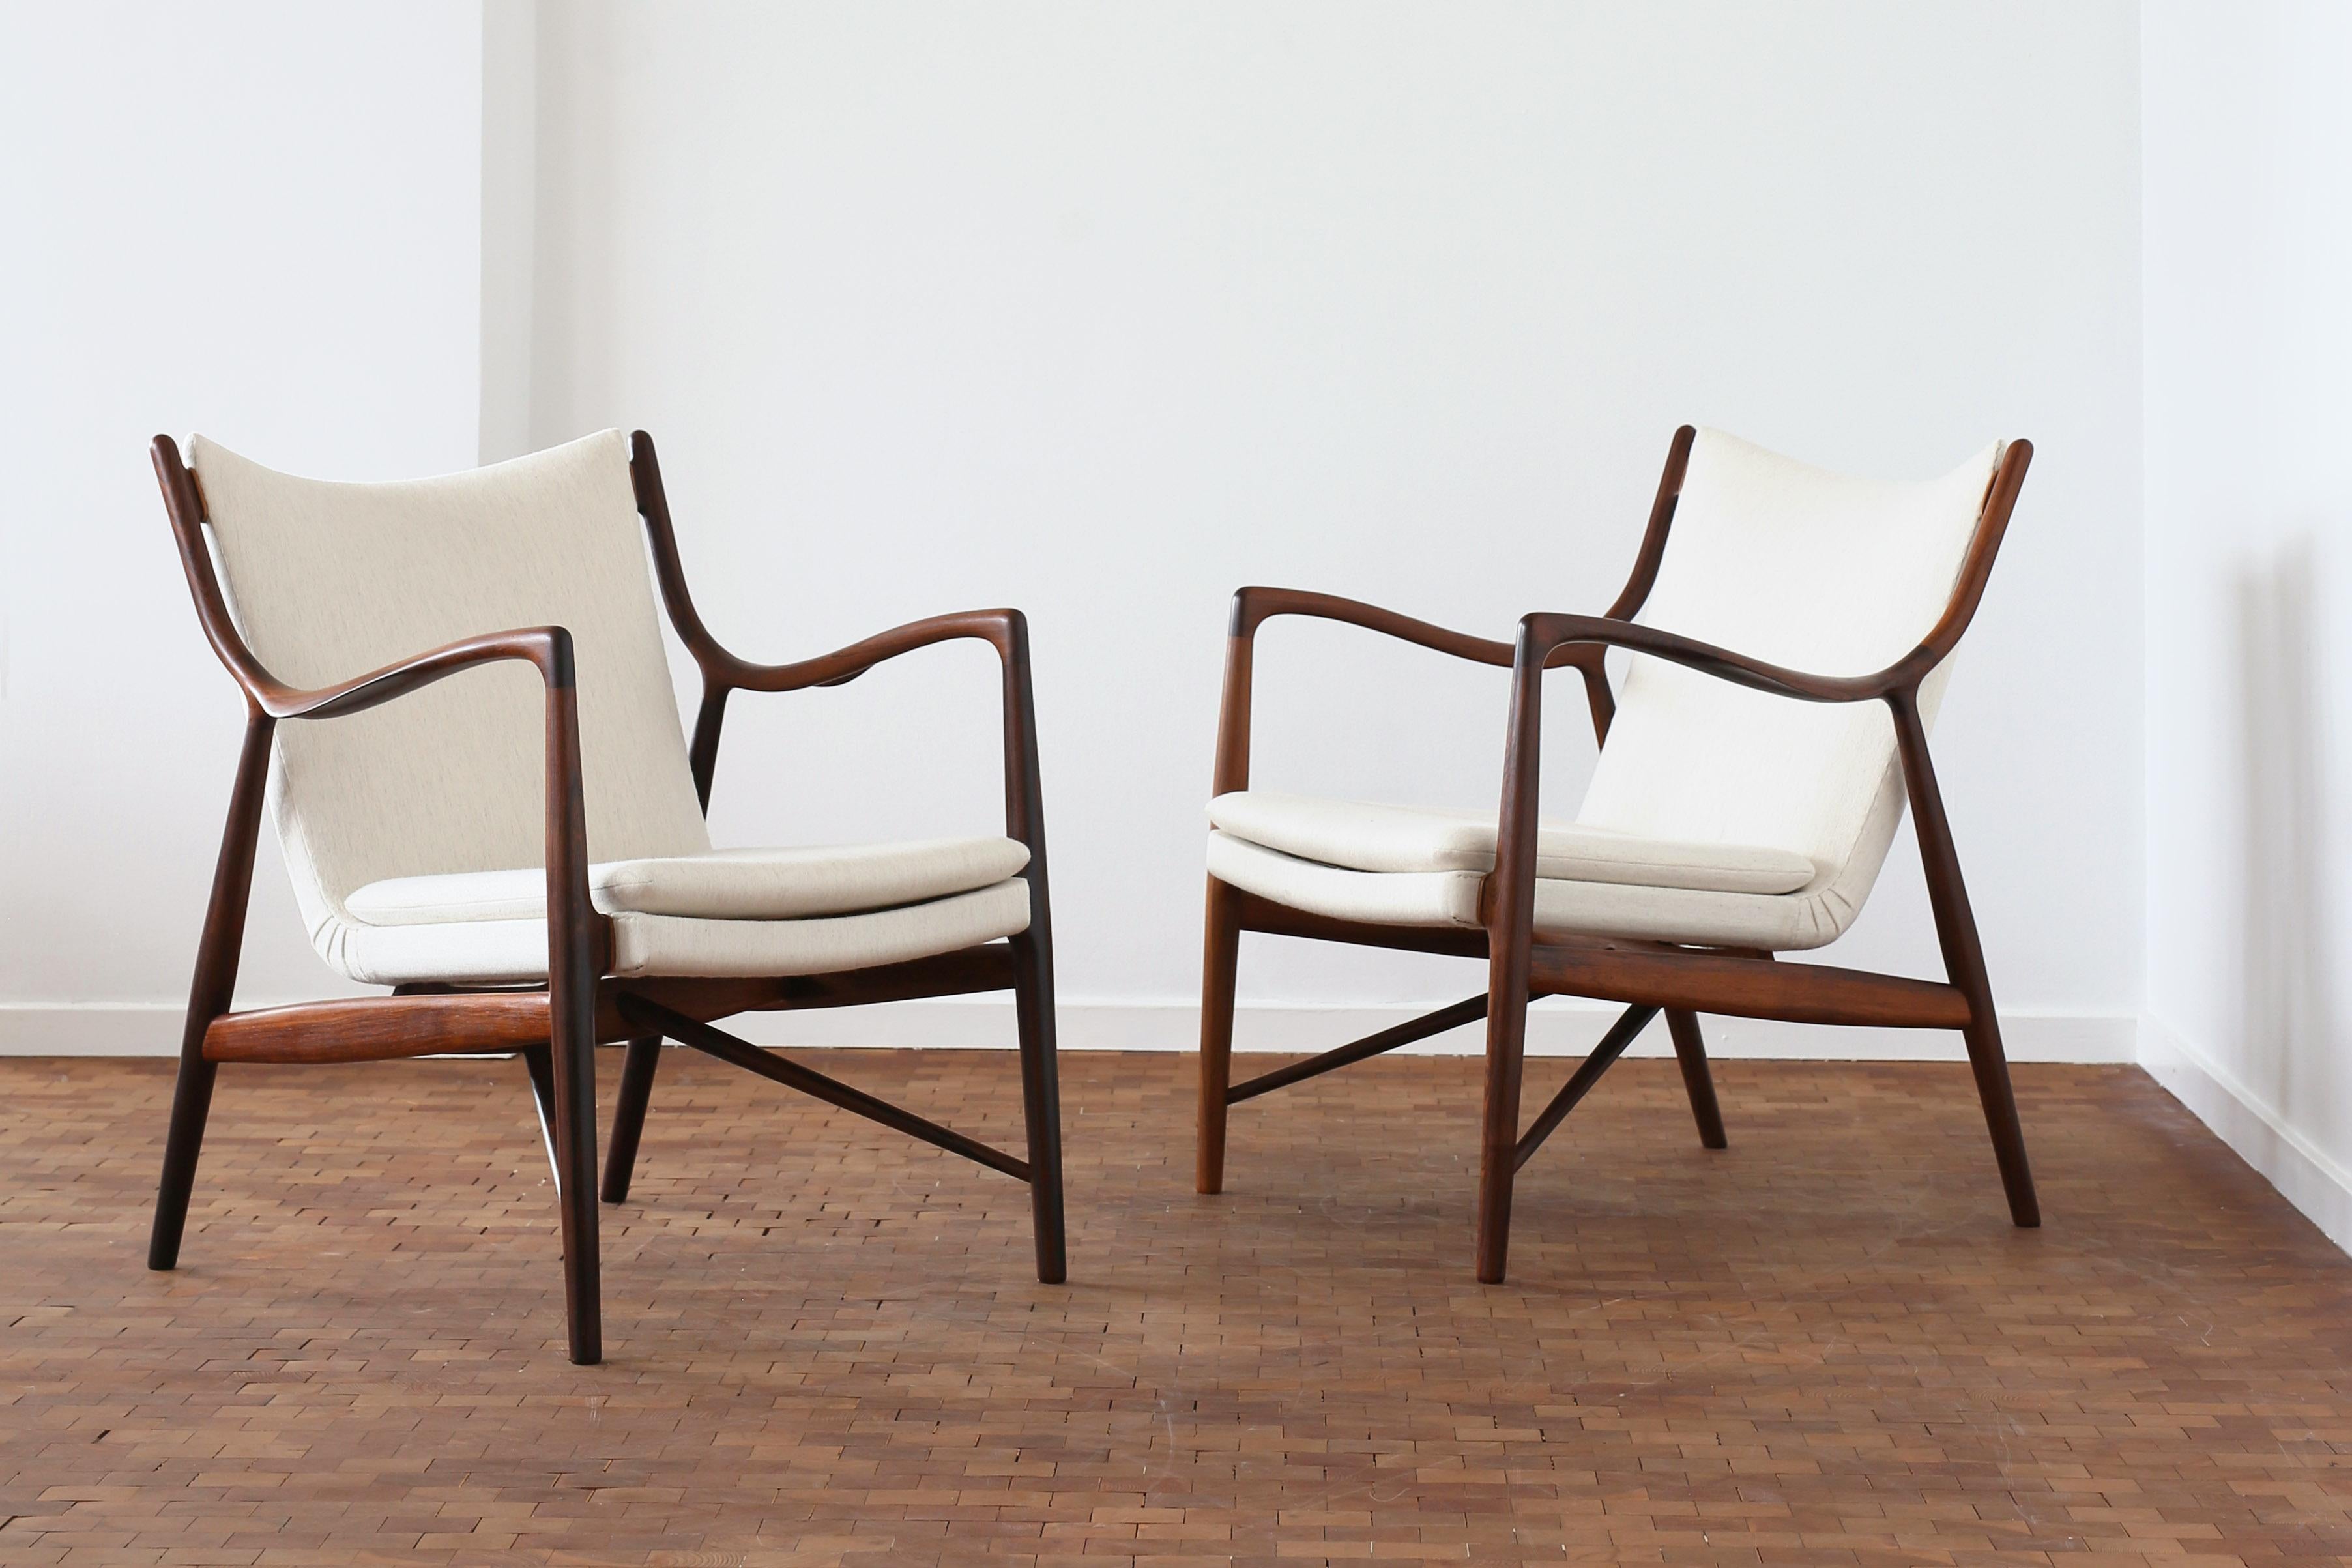 A rare pair of Finn Juhl NV-45 chairs with frame of Brazilian rosewood, upholstered with light fabric. 

Designed 1945 and made at cabinetmaker Niels Vodder. both chairs stamped by Niels Vodder. 
. 
Very fine condition. 
CITES Certificate included. 
